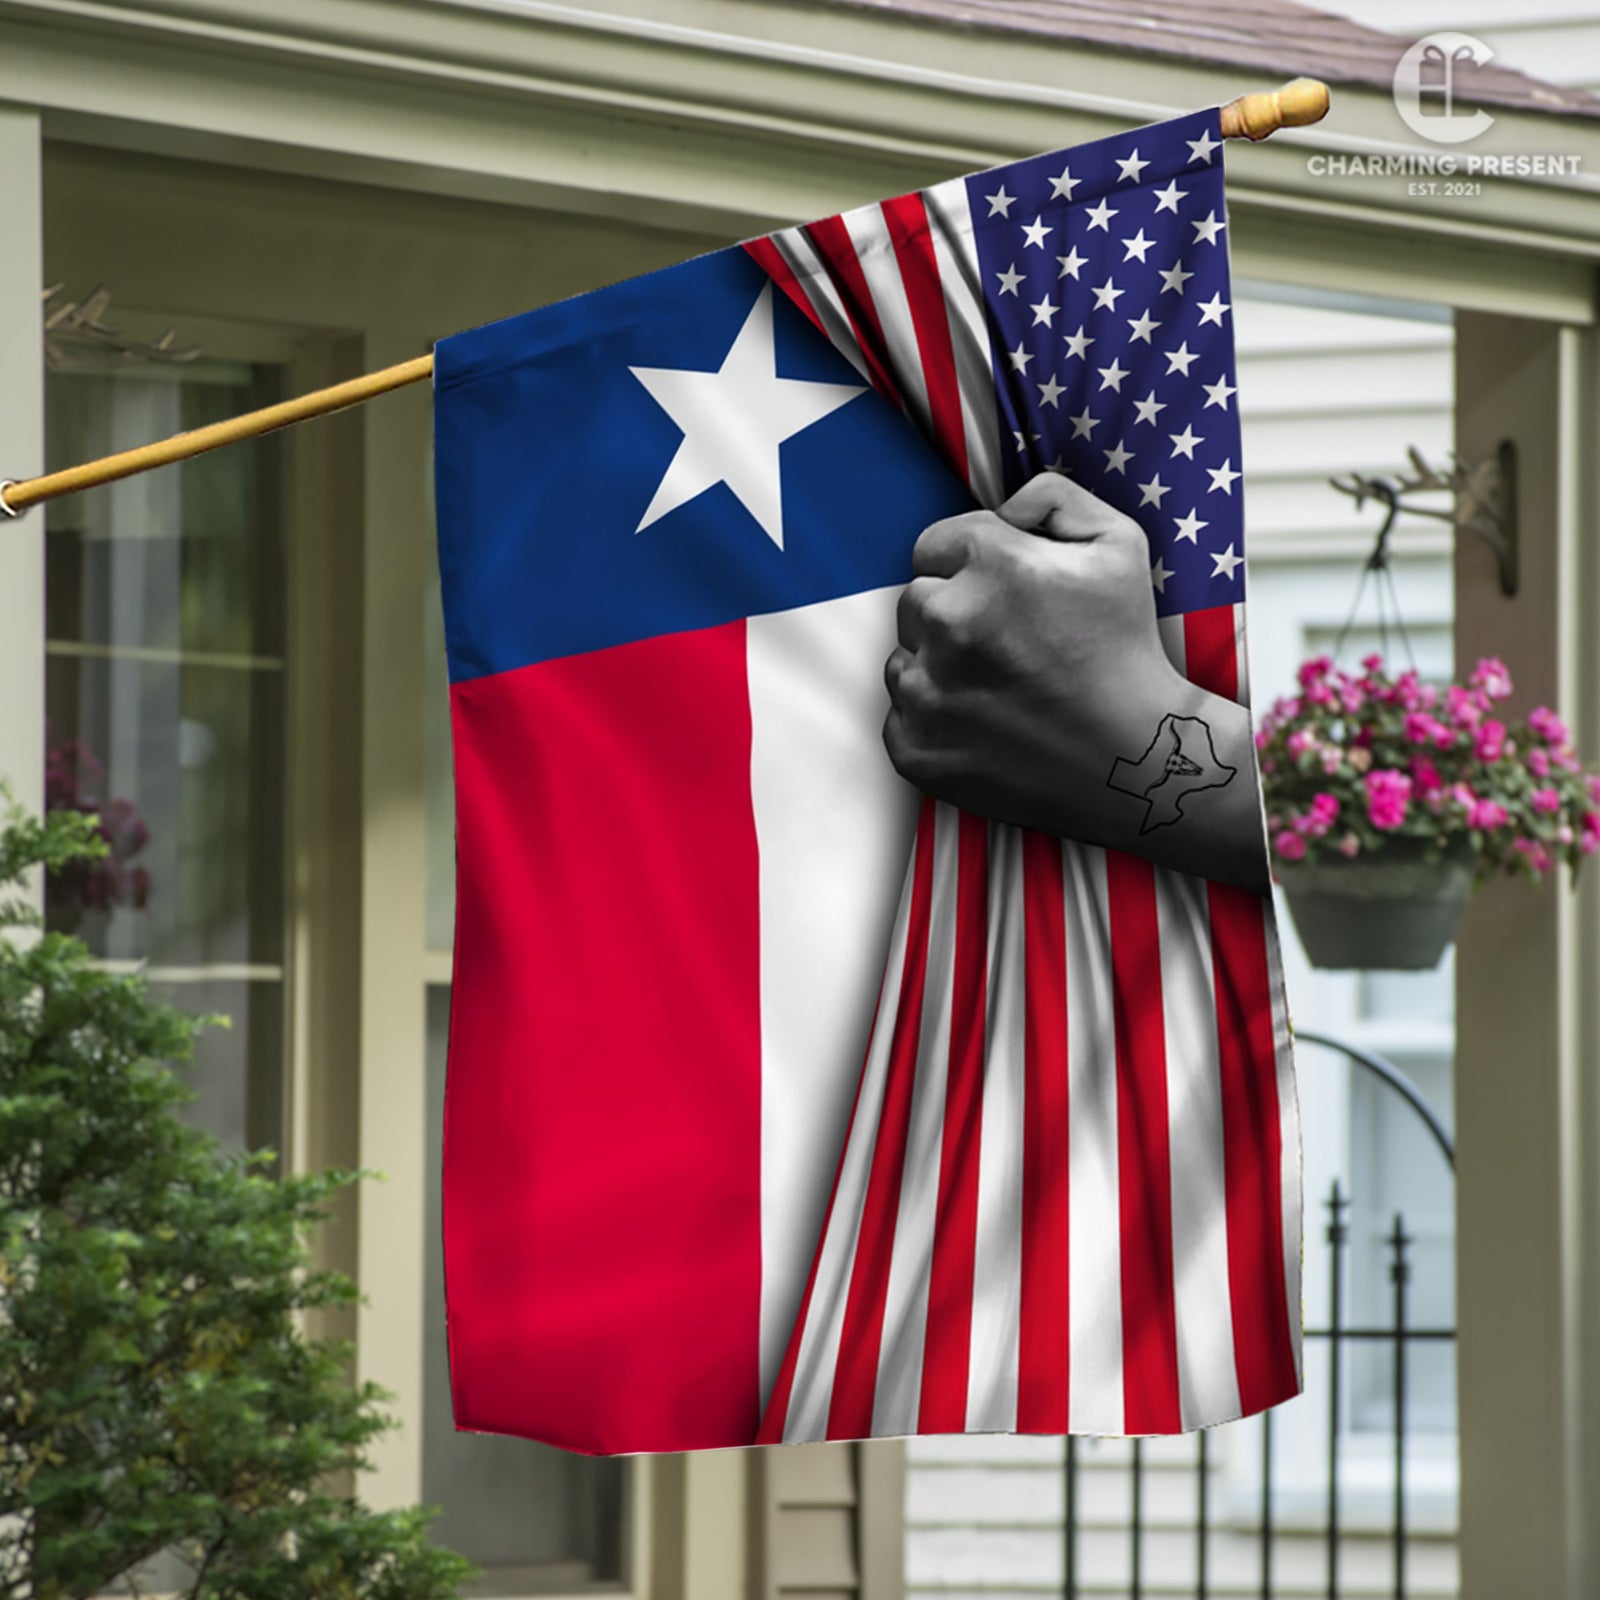 American Texas State Flag - Texas Lone Star Flag - American Texas State Decoration